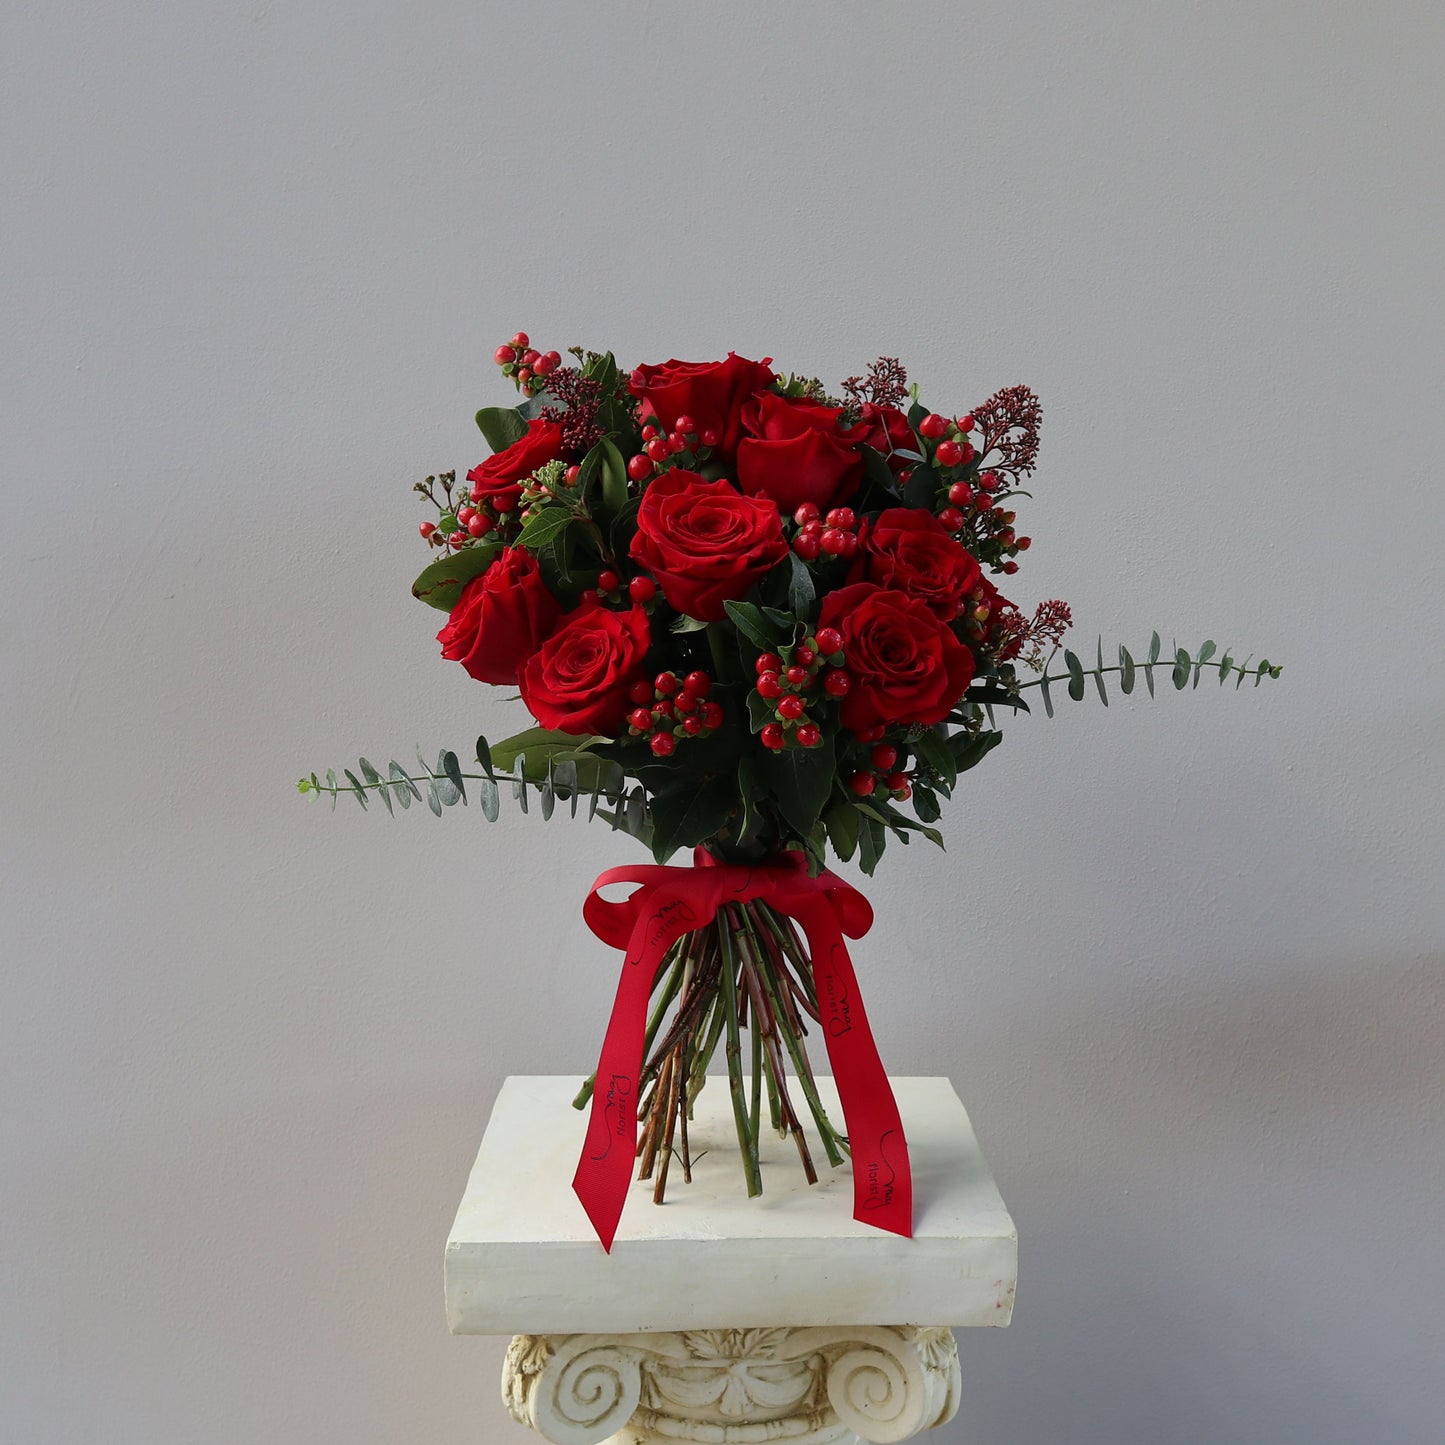 Be my Valentine - our florist's choice